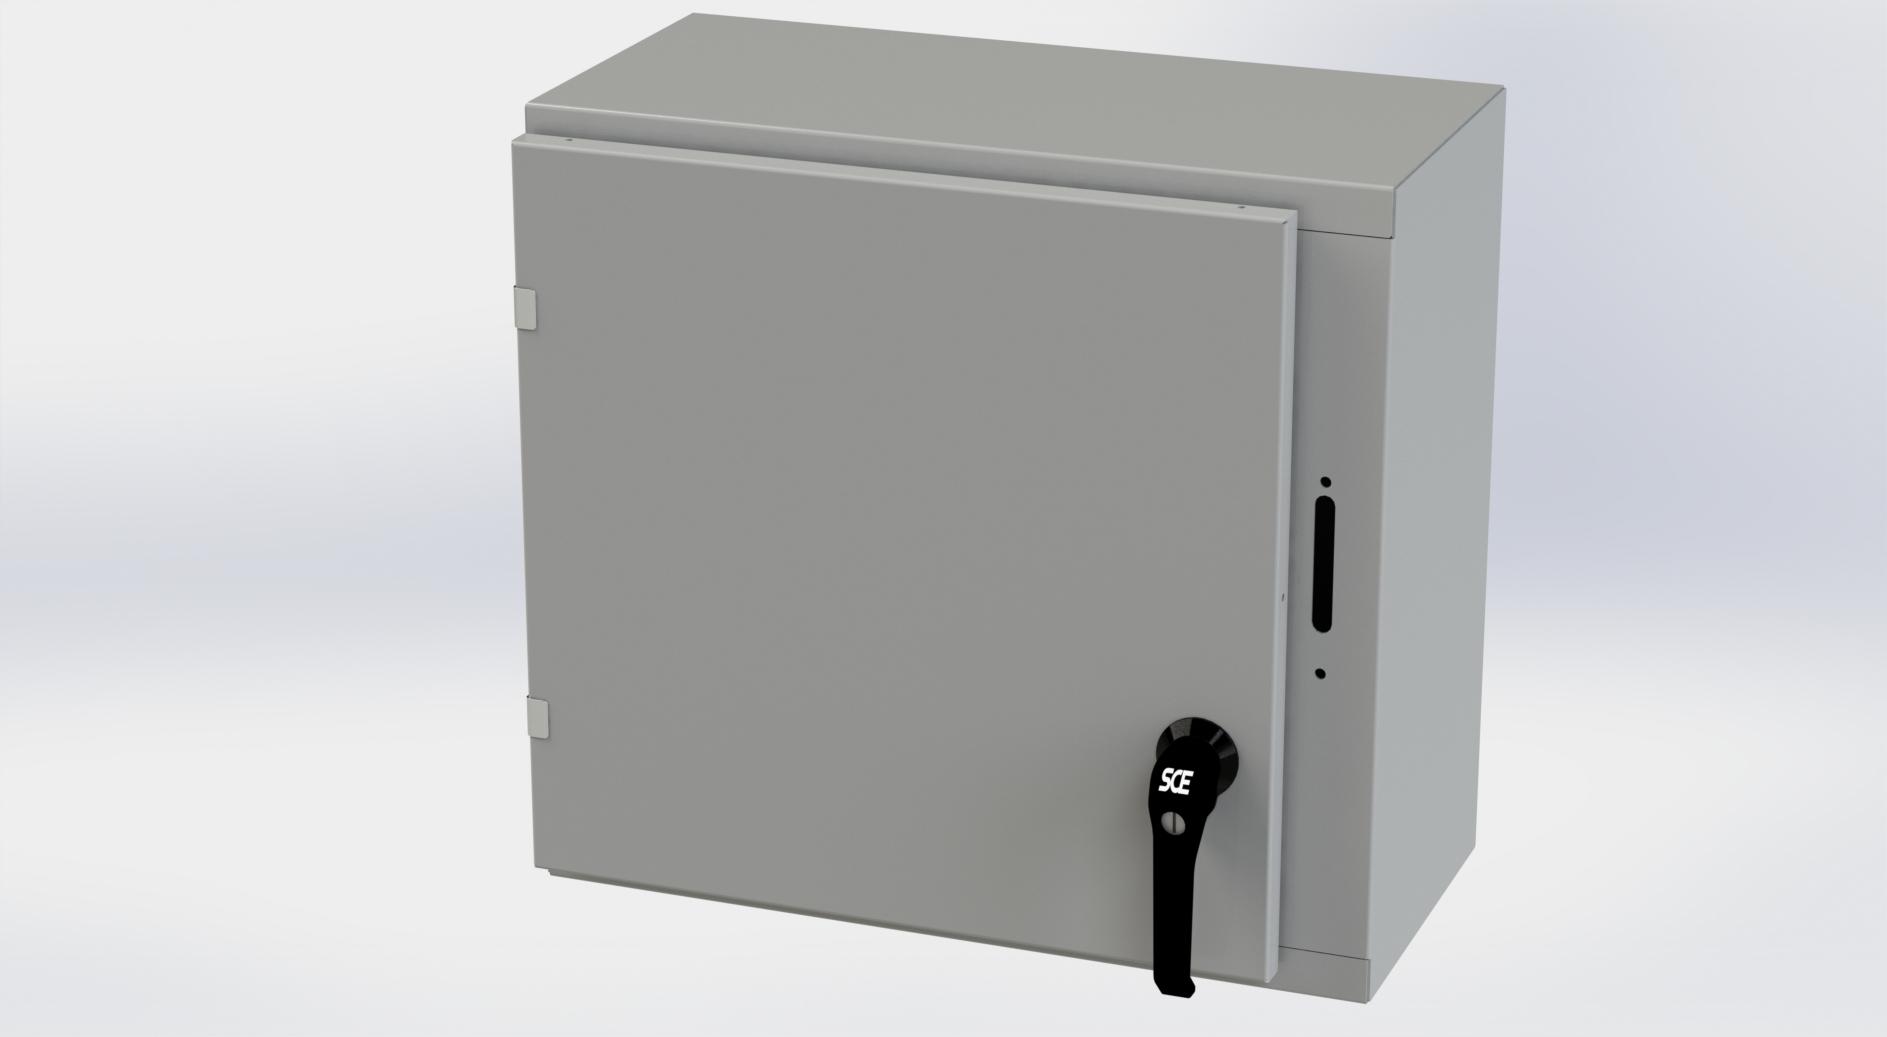 Saginaw Control SCE-20XEL2110LP XEL LP Enclosure, Height:20.00", Width:21.38", Depth:10.00", ANSI-61 gray powder coating inside and out. Optional sub-panels are powder coated white.